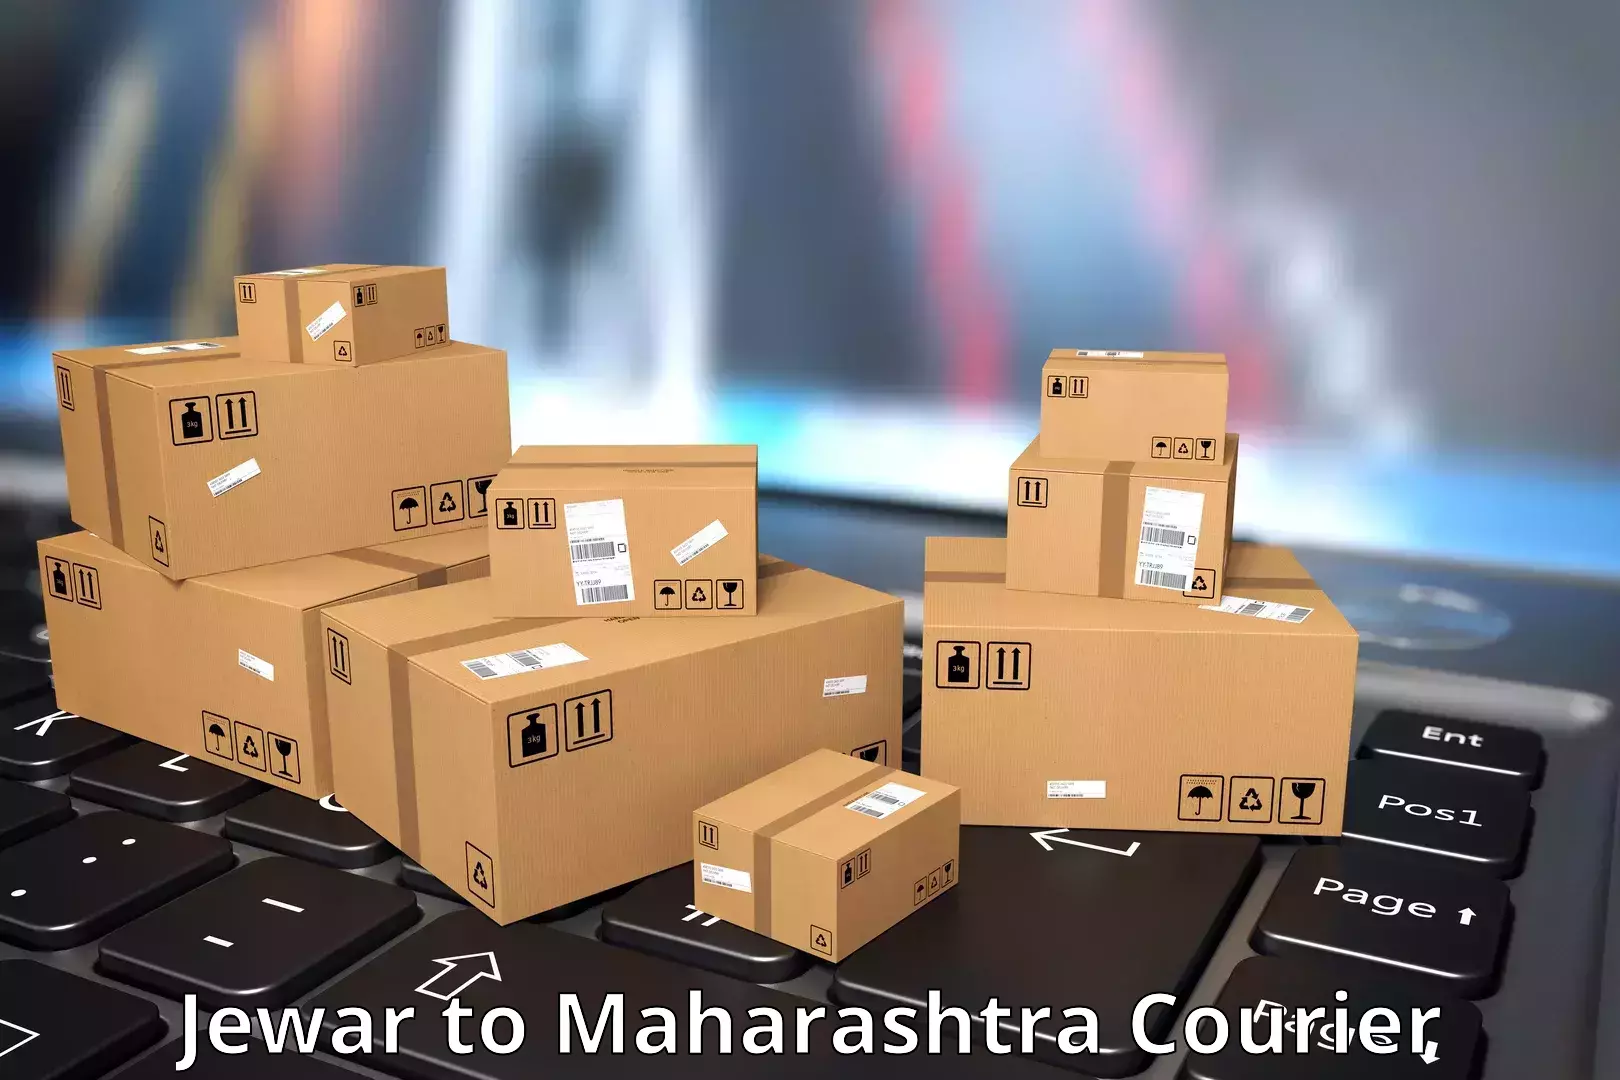 Expedited shipping methods Jewar to Thane